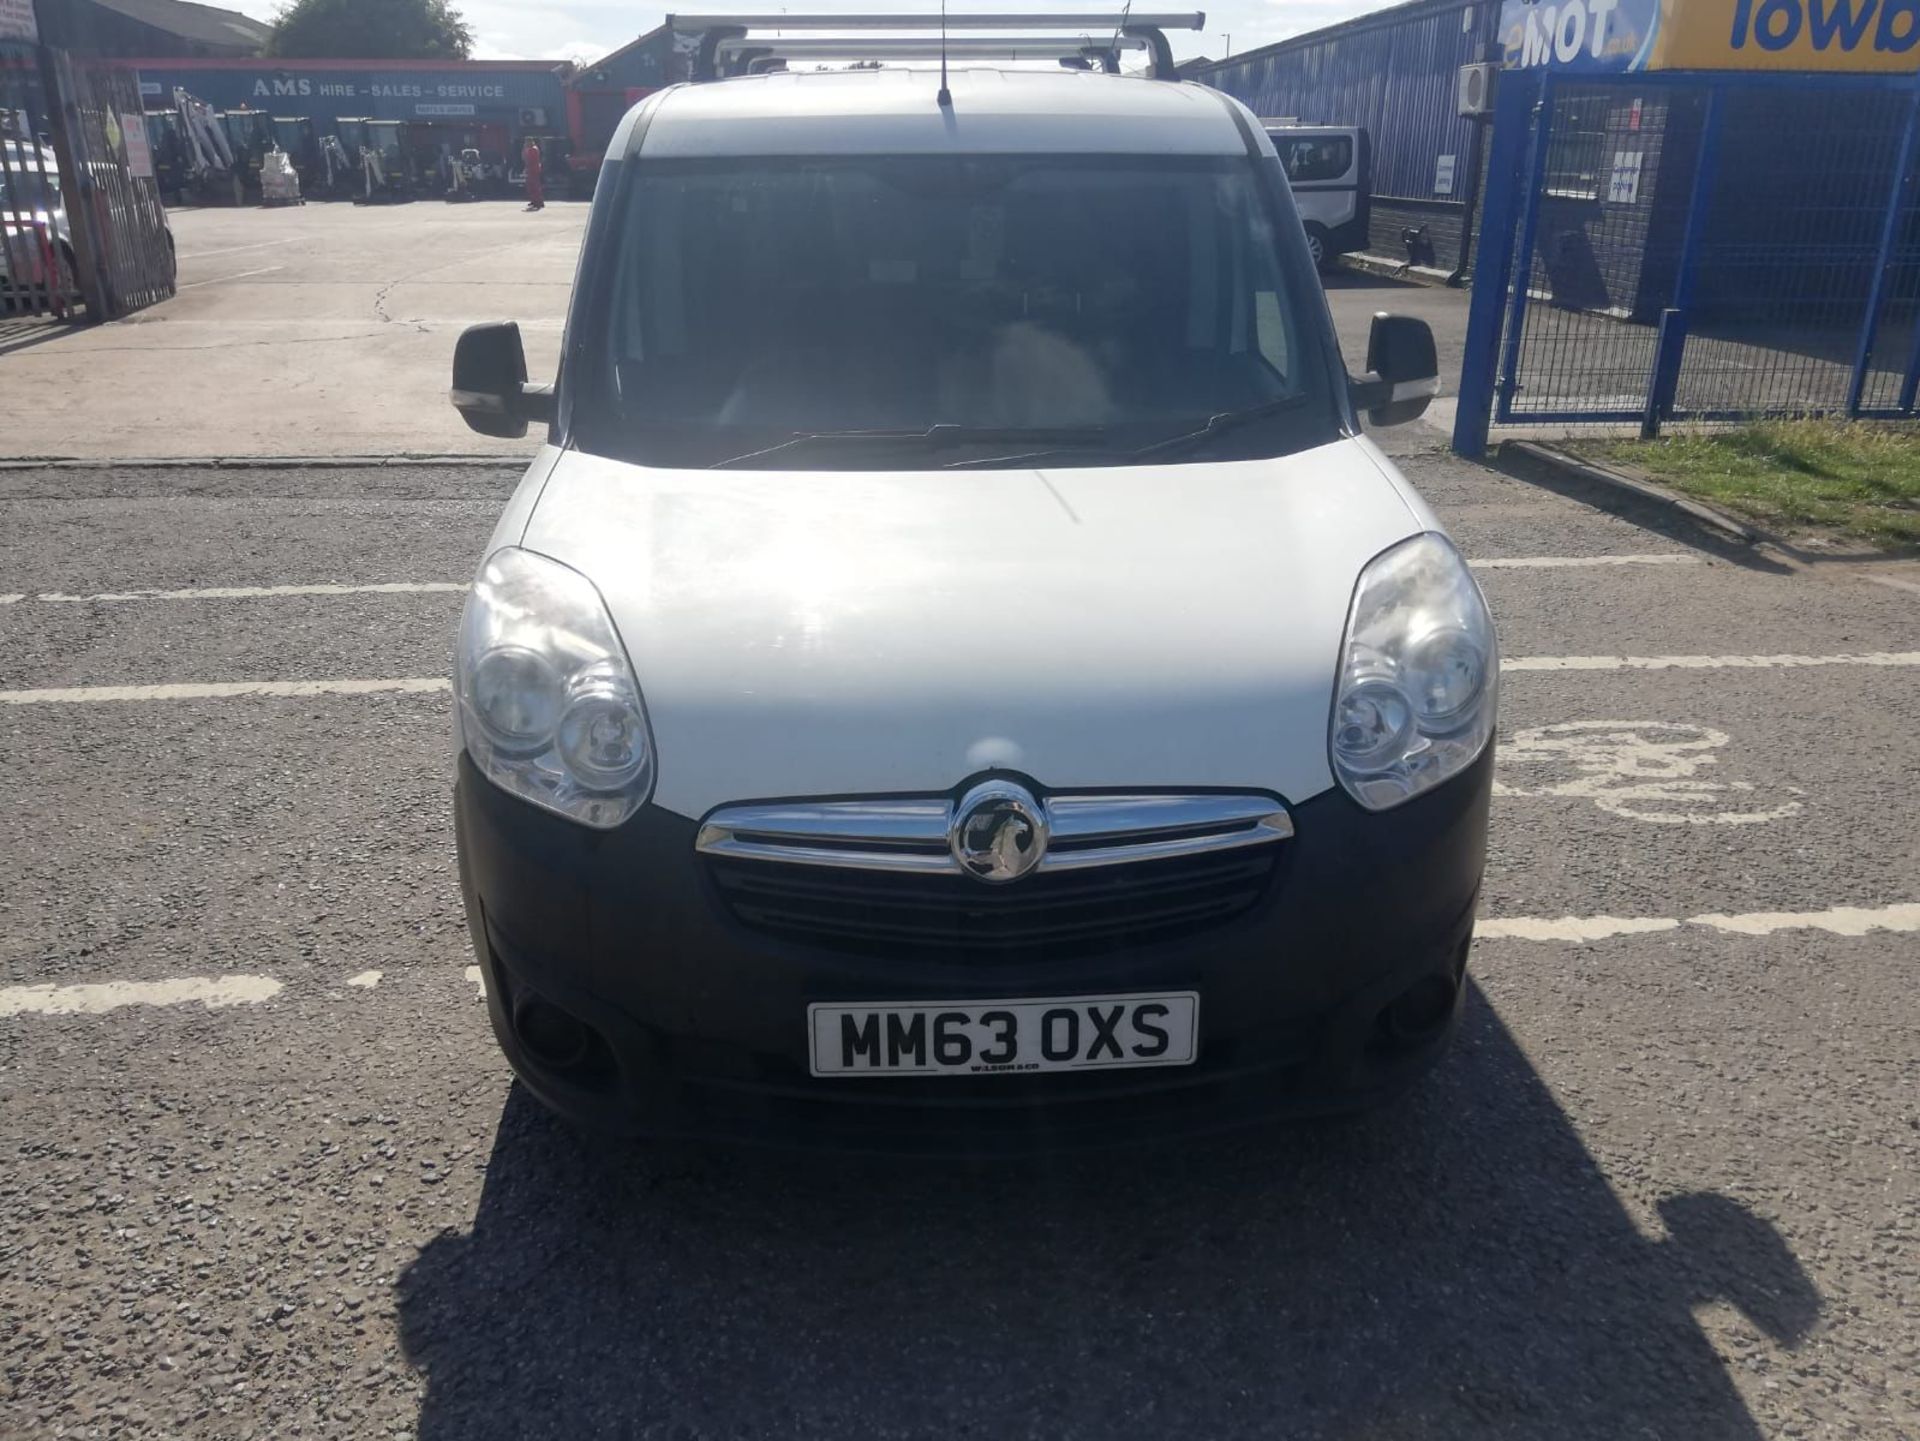 2013 63 Vauxhall Combo Panel van - 84k miles - Roof rack - Ply lined - Image 2 of 10